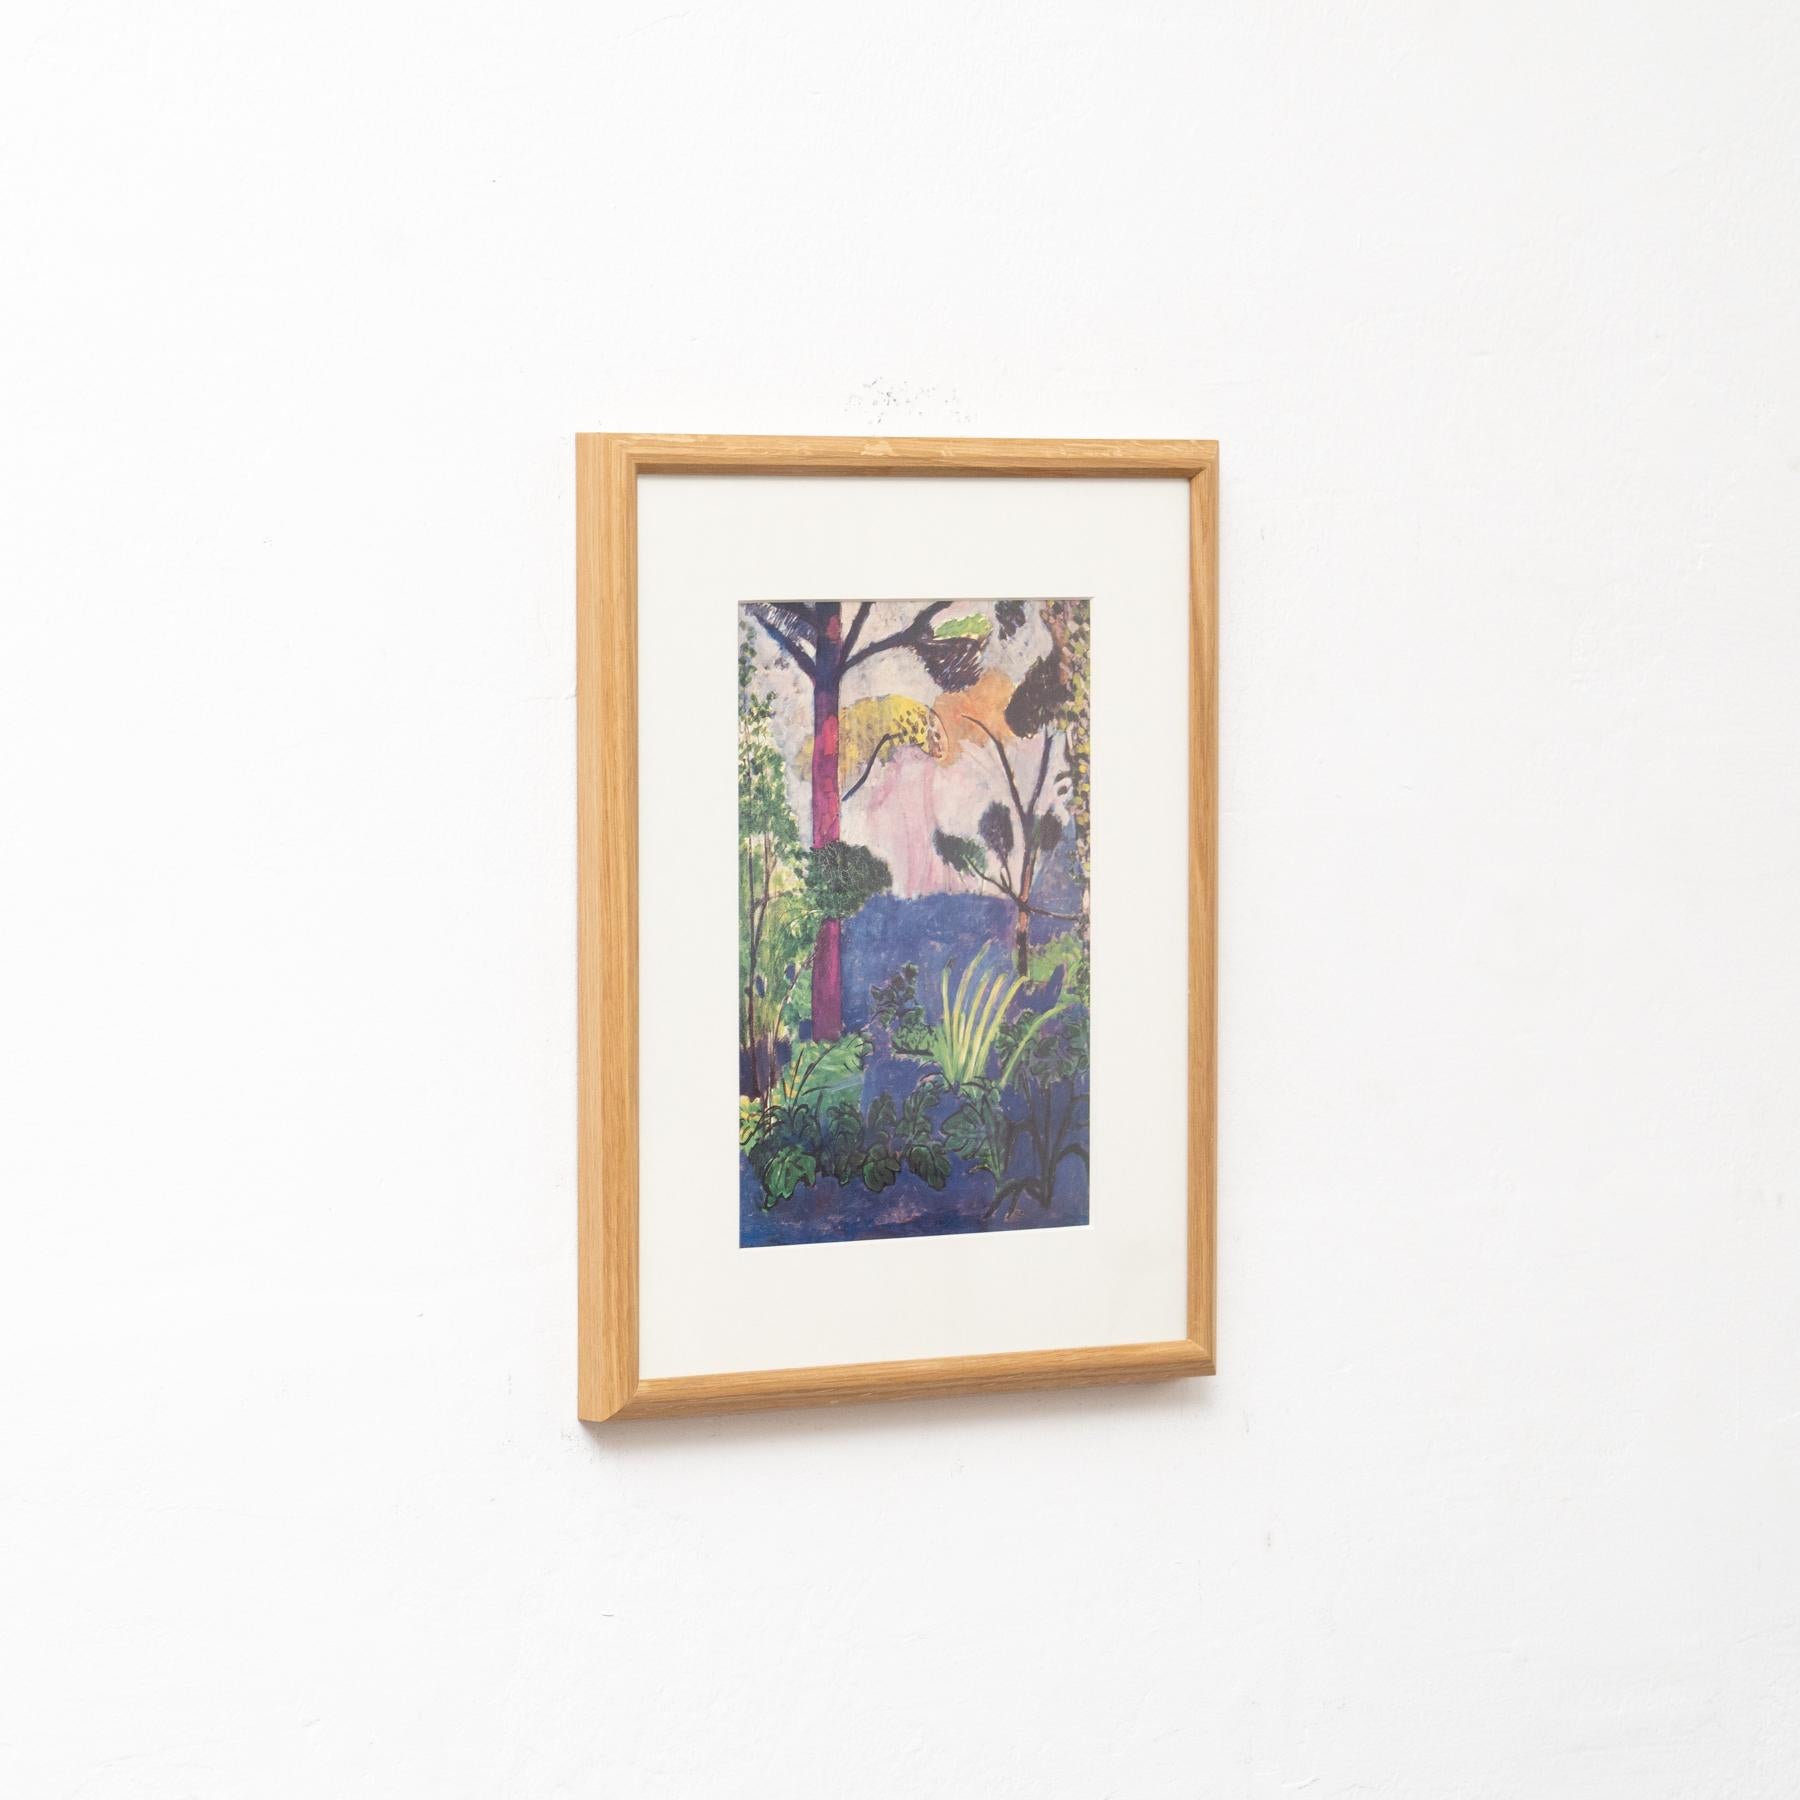 Spanish Matisse Framed Colorful Print by Moderna Museet, circa 1990  For Sale